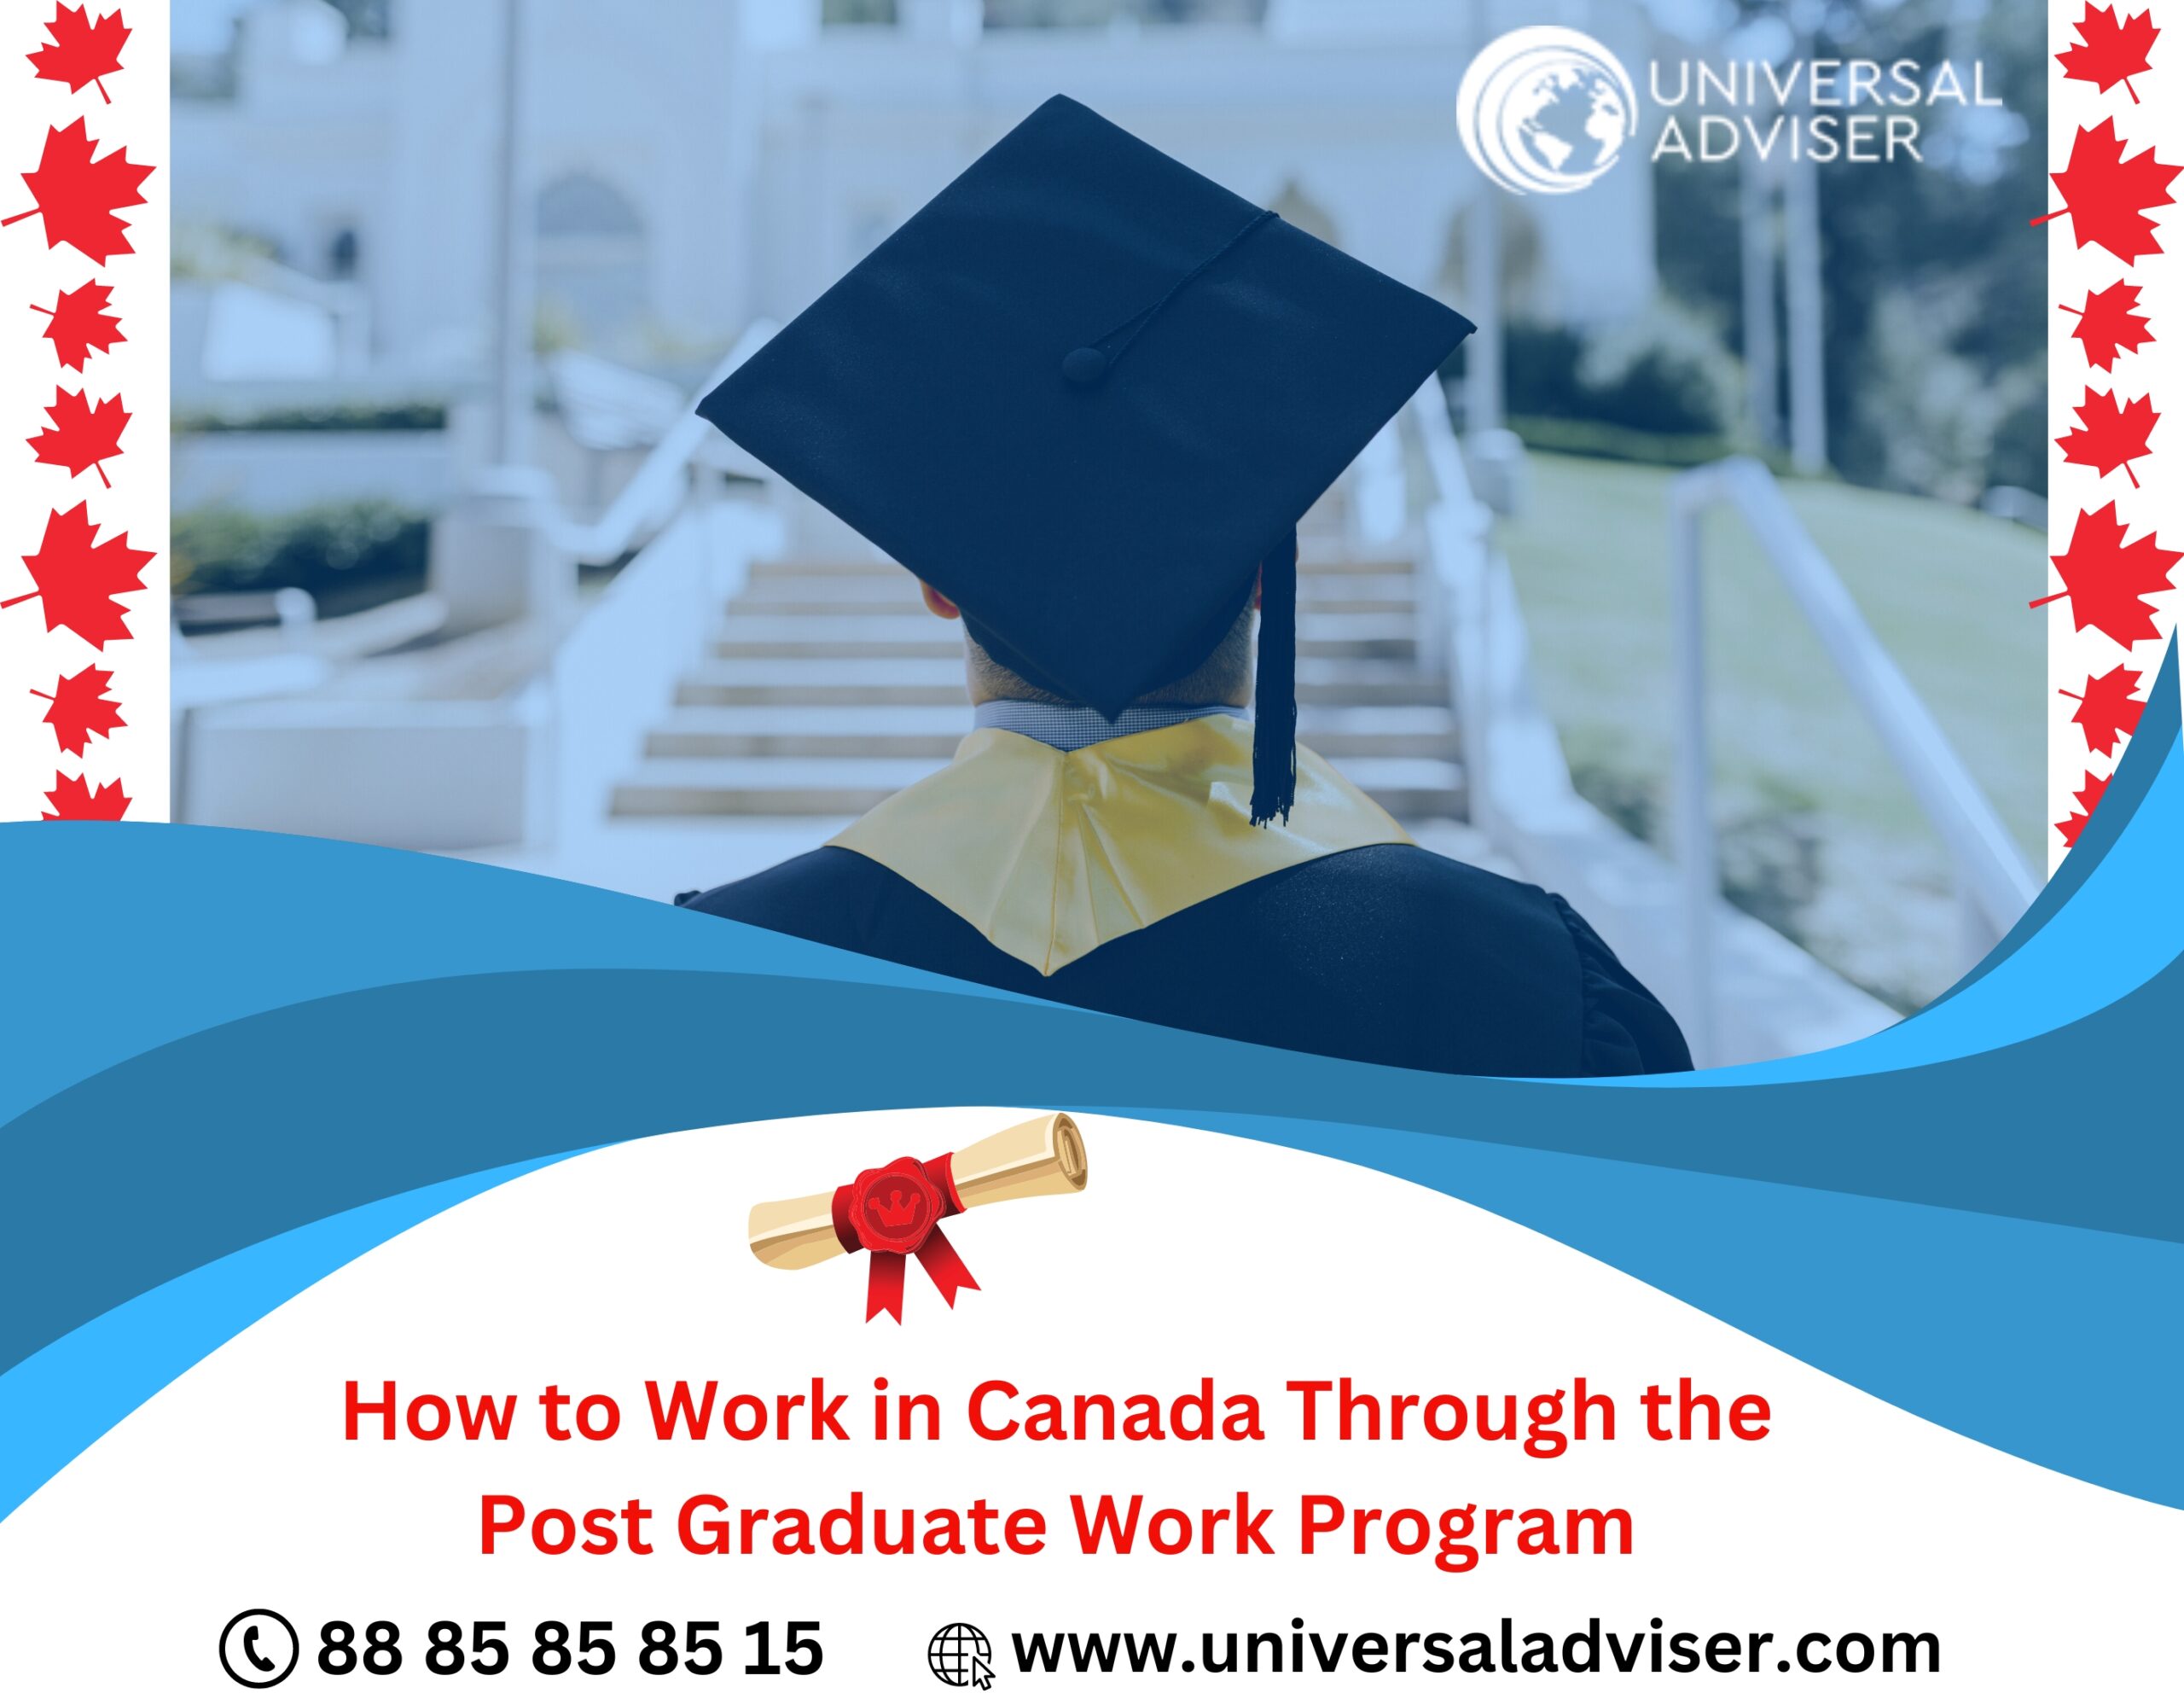 How to Work in Canada Through the Post Graduate Work Program